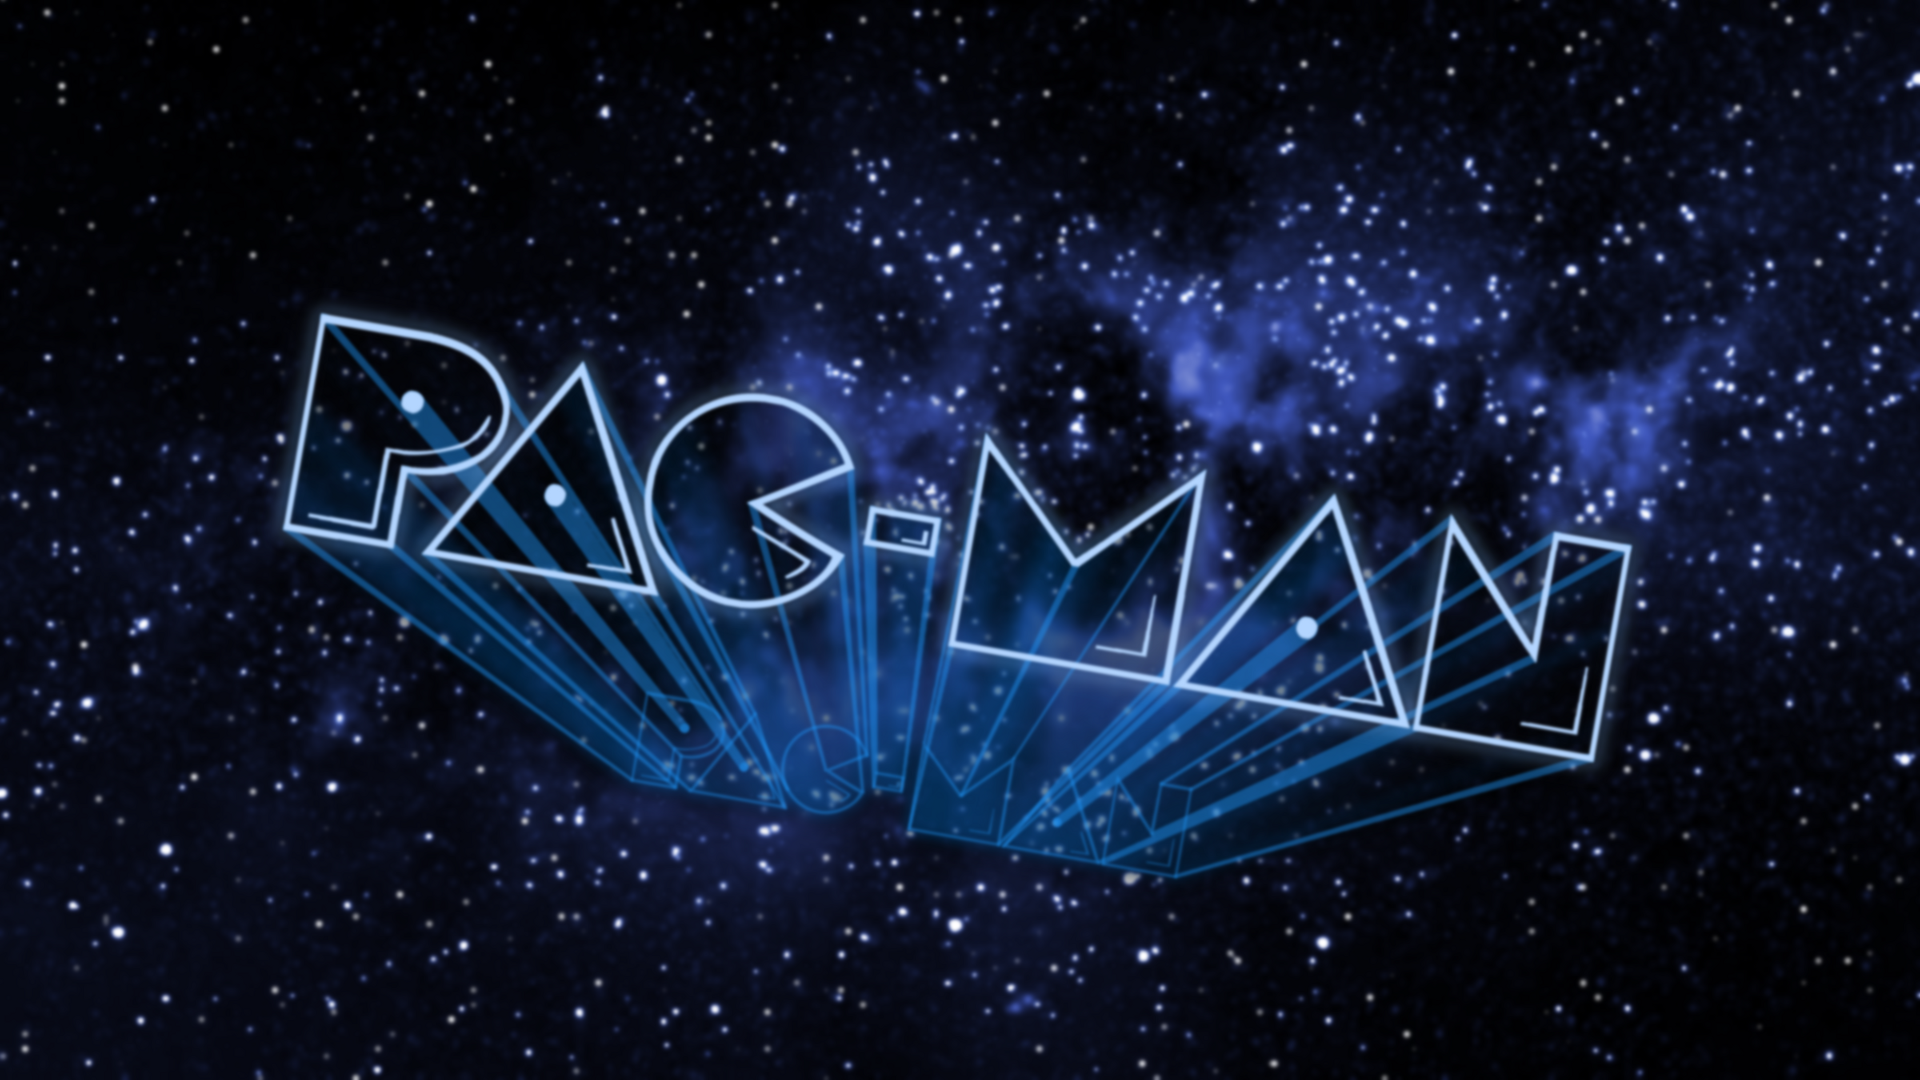 pacman_fanfic___main_title_card__by_atar